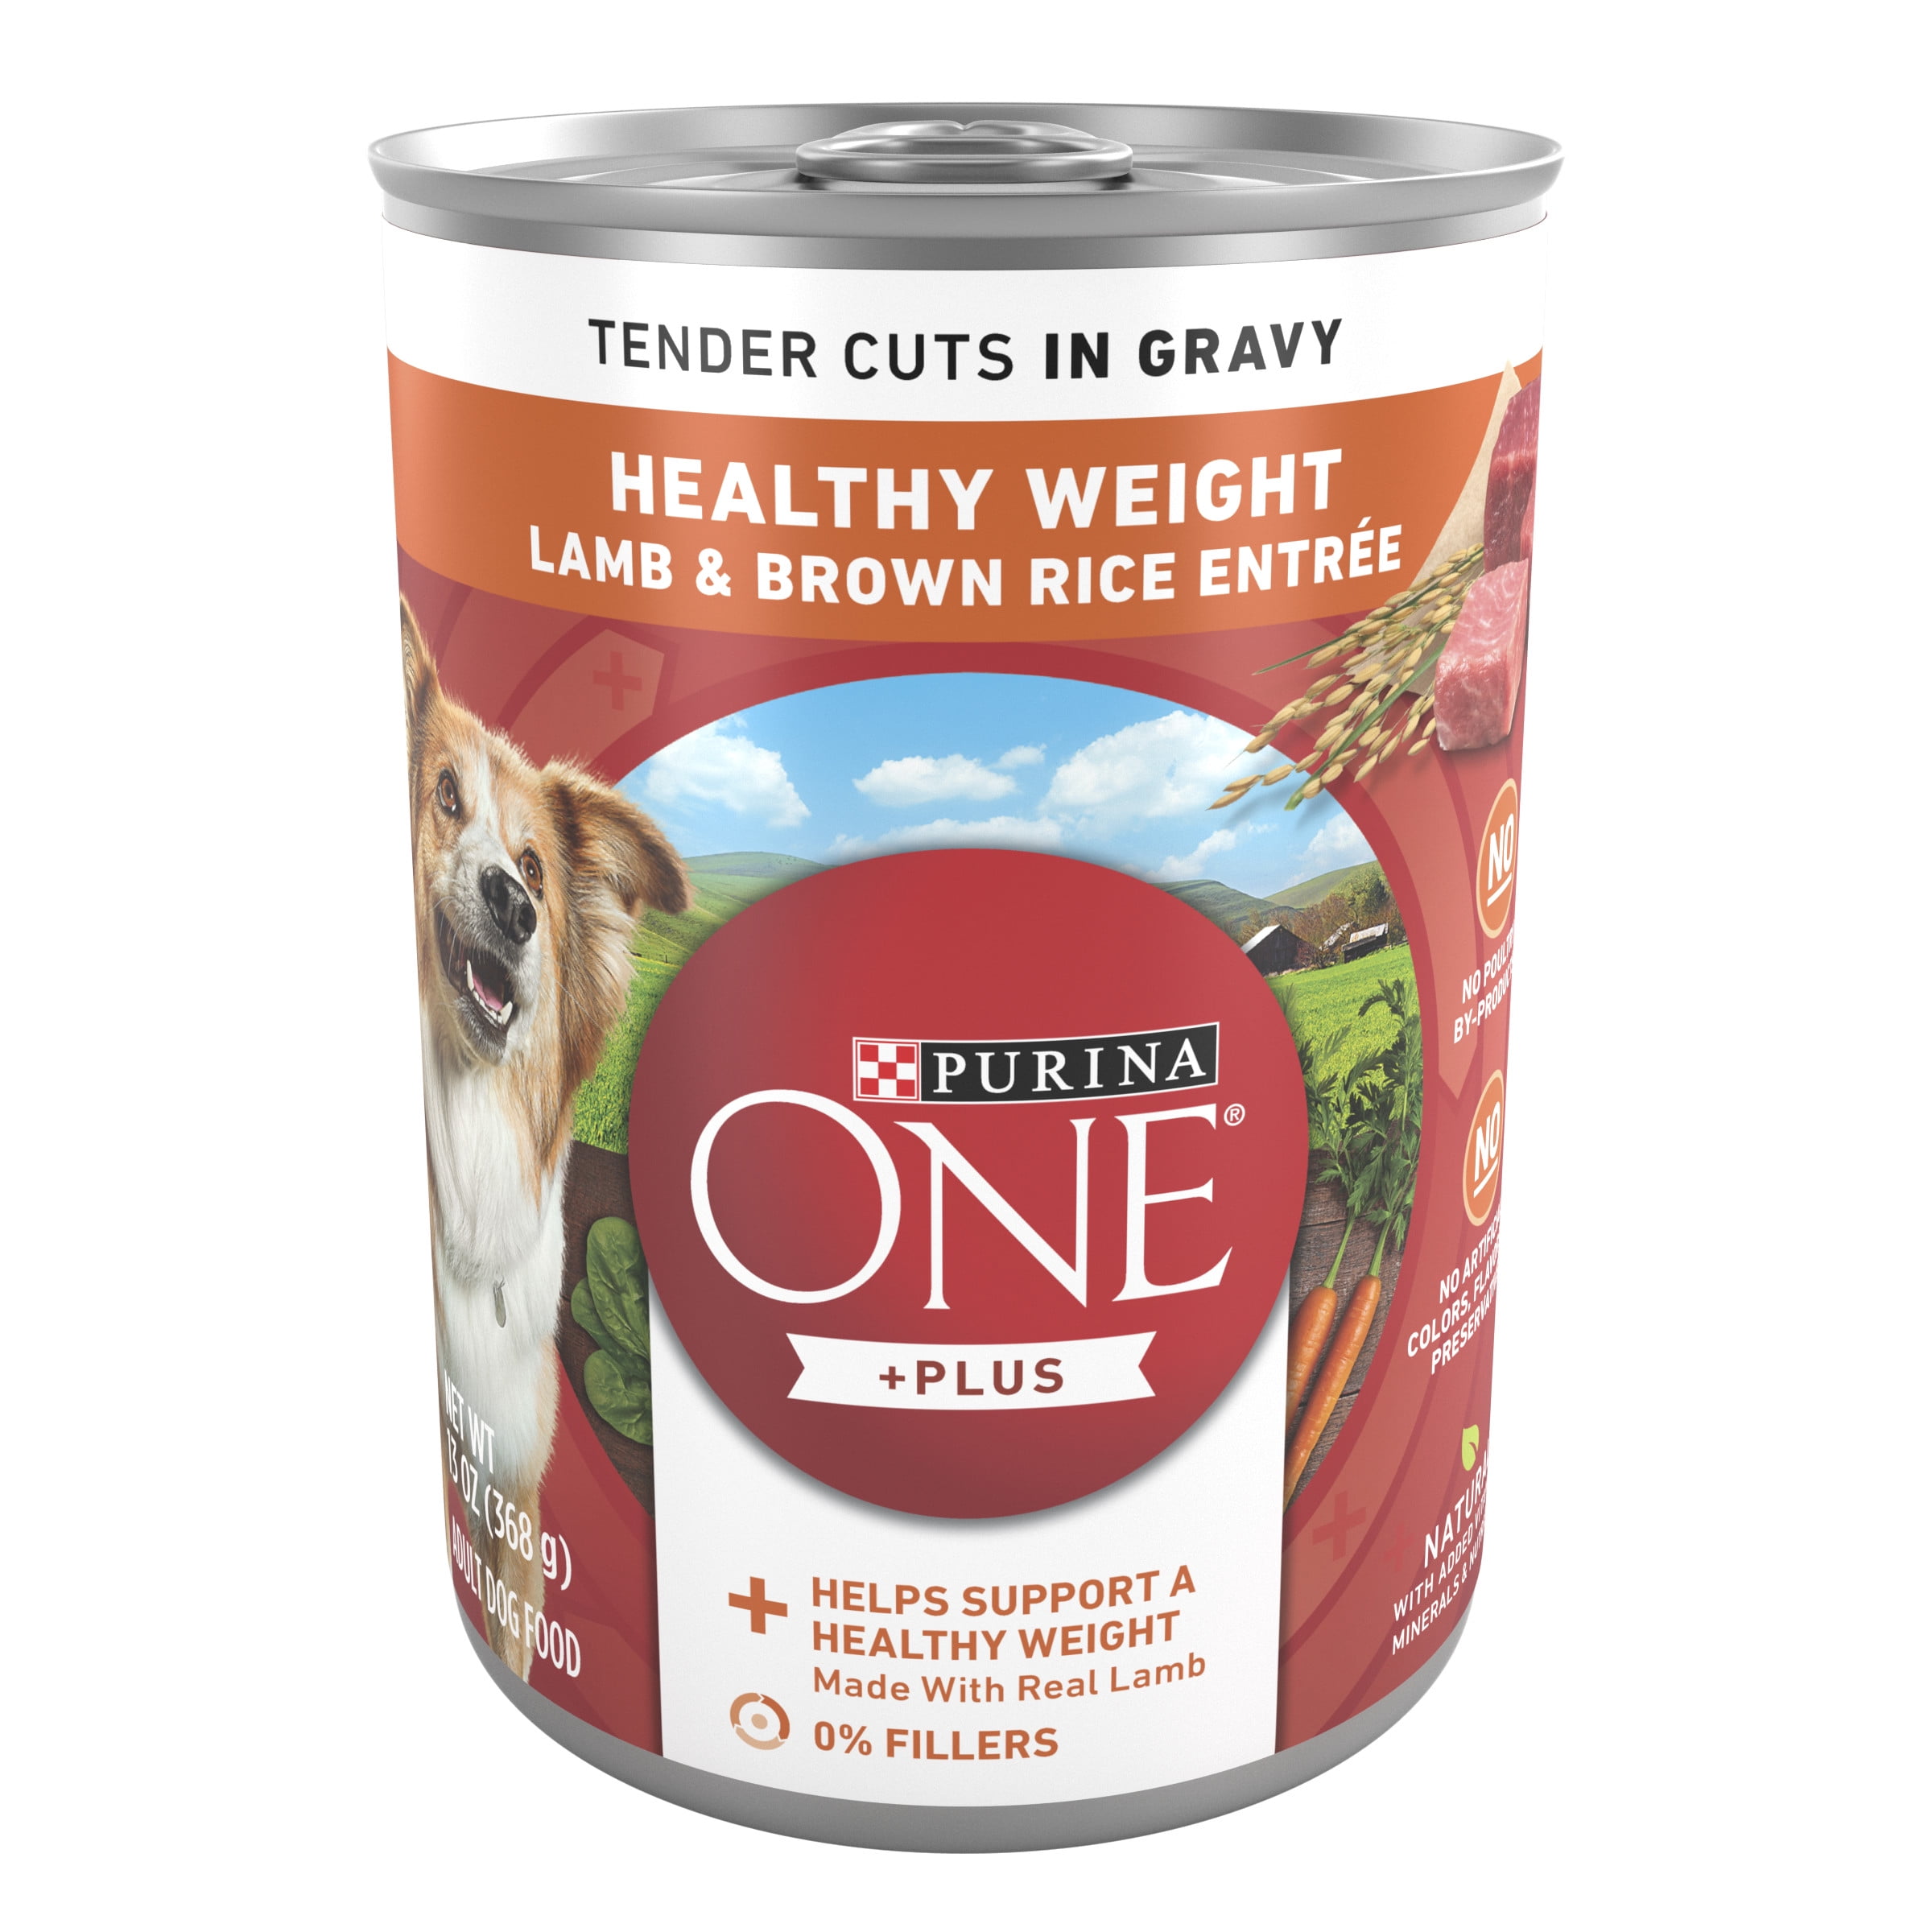 Purina ONE +Plus Lamb & Brown Rice Gravy Wet Dog Food, 13 oz Can